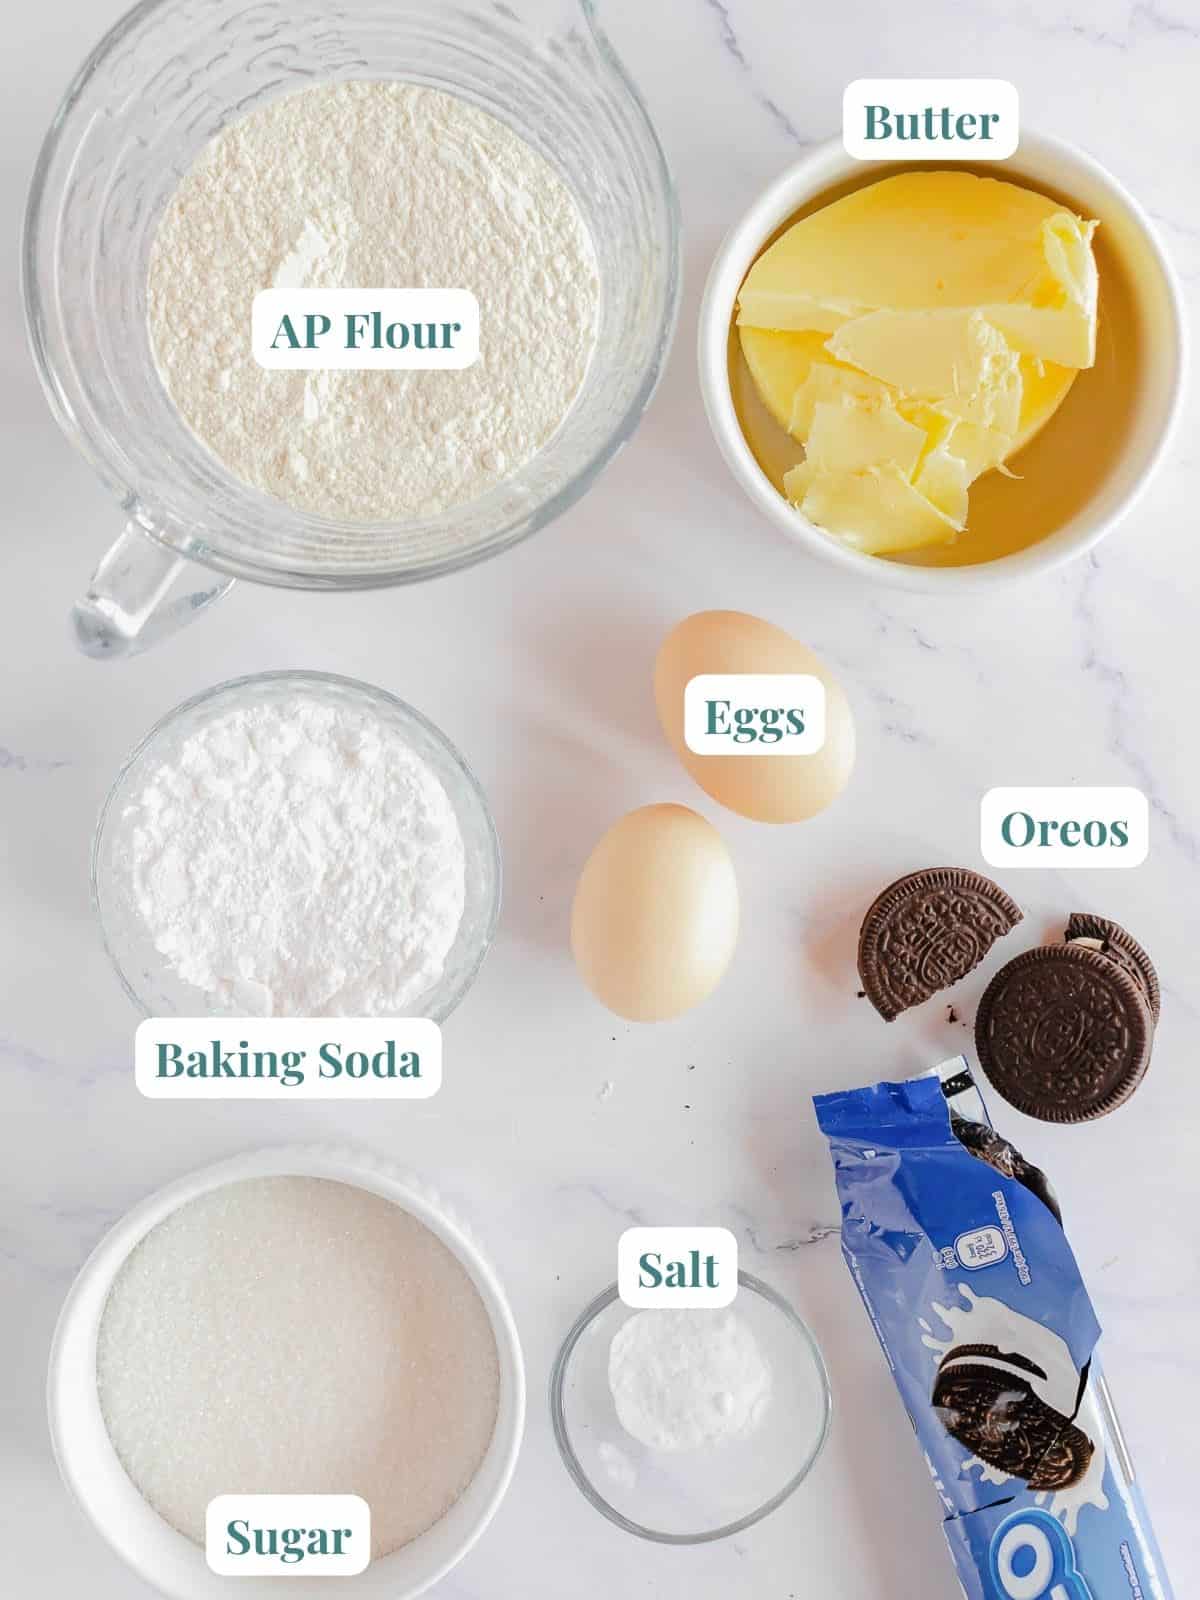 Oreo cookie ingredients and recipe on a marble countertop.